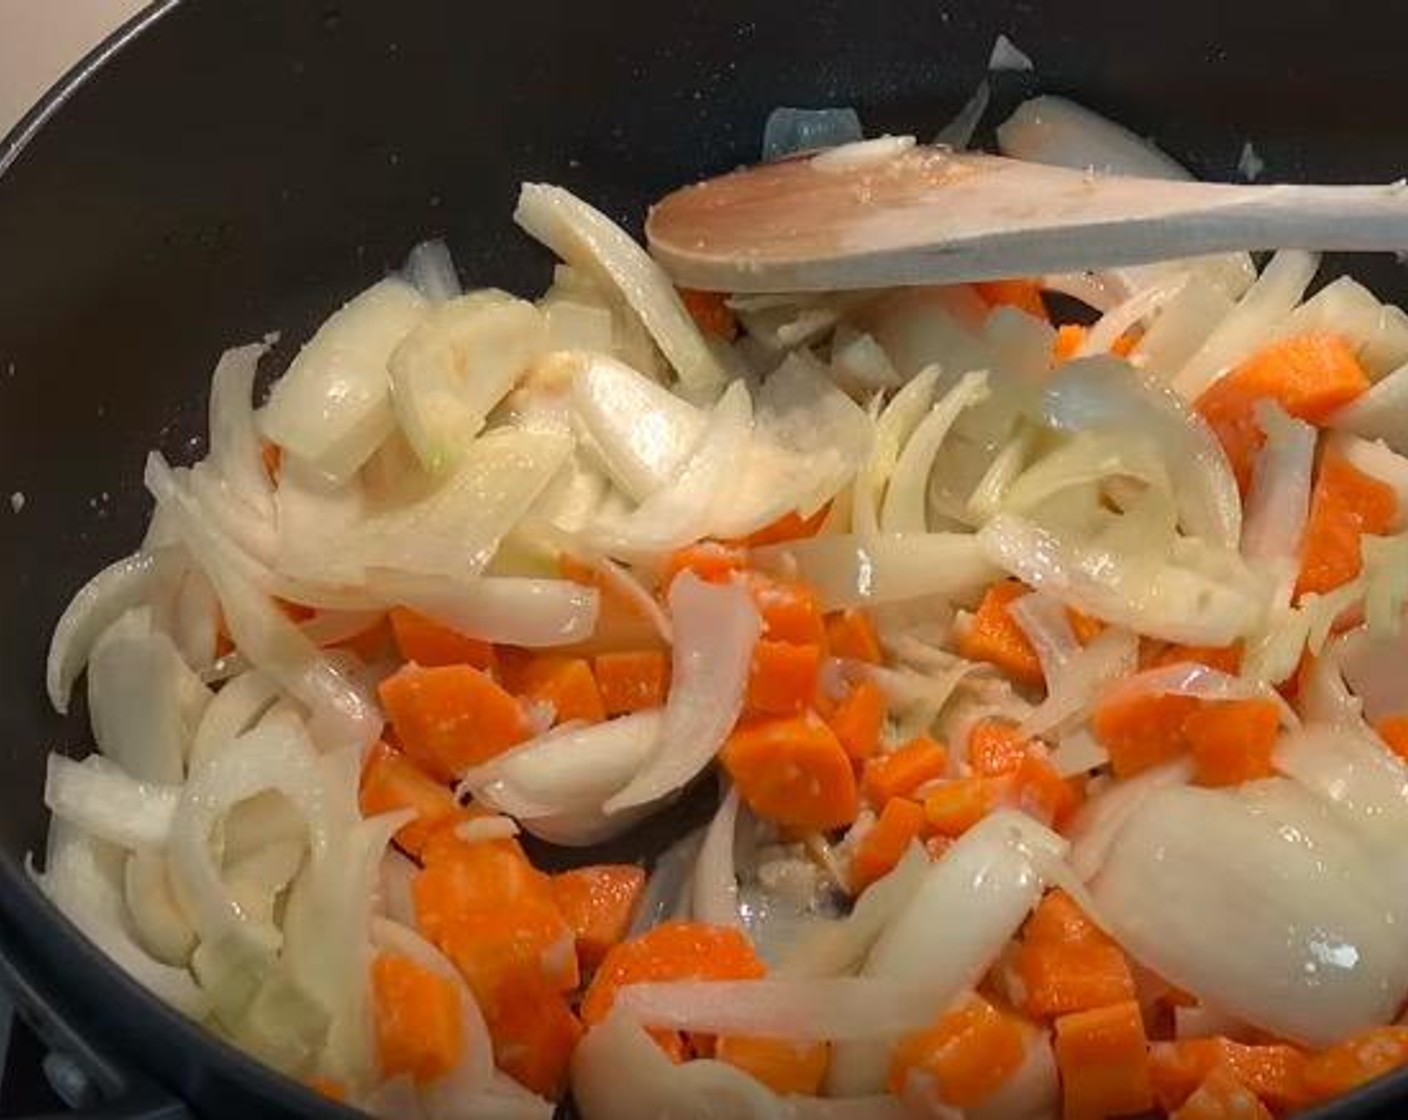 step 2 In the same pan over medium heat, add Garlic (2 cloves), Yellow Onions (2) and Carrots (2). Cook, stirring, for a couple minutes or until the vegetables have started to soften.